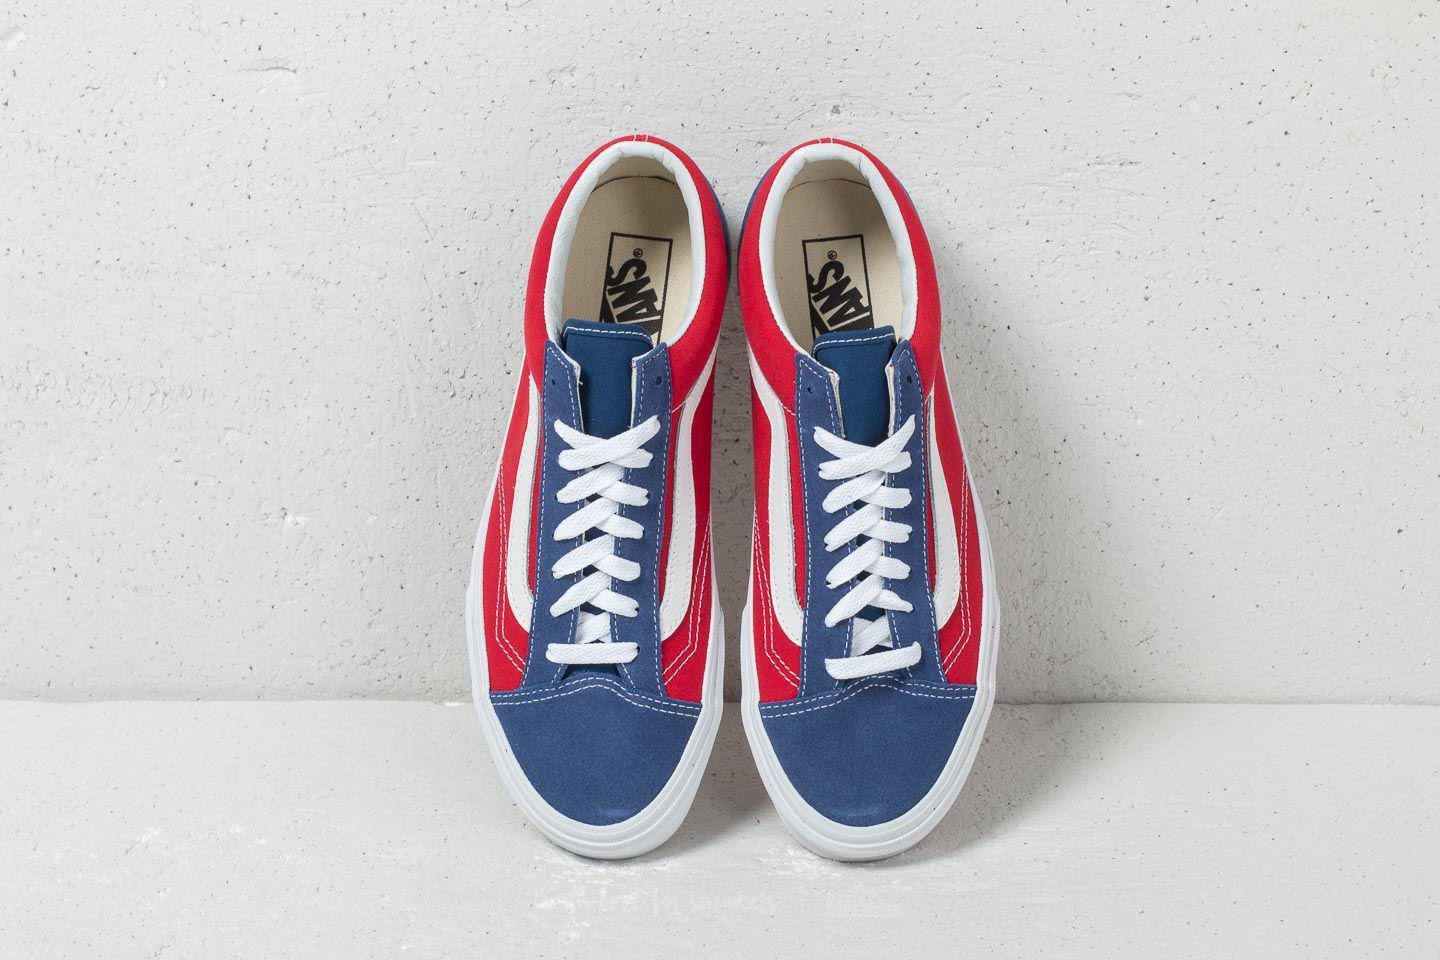 vans style 36 red and blue